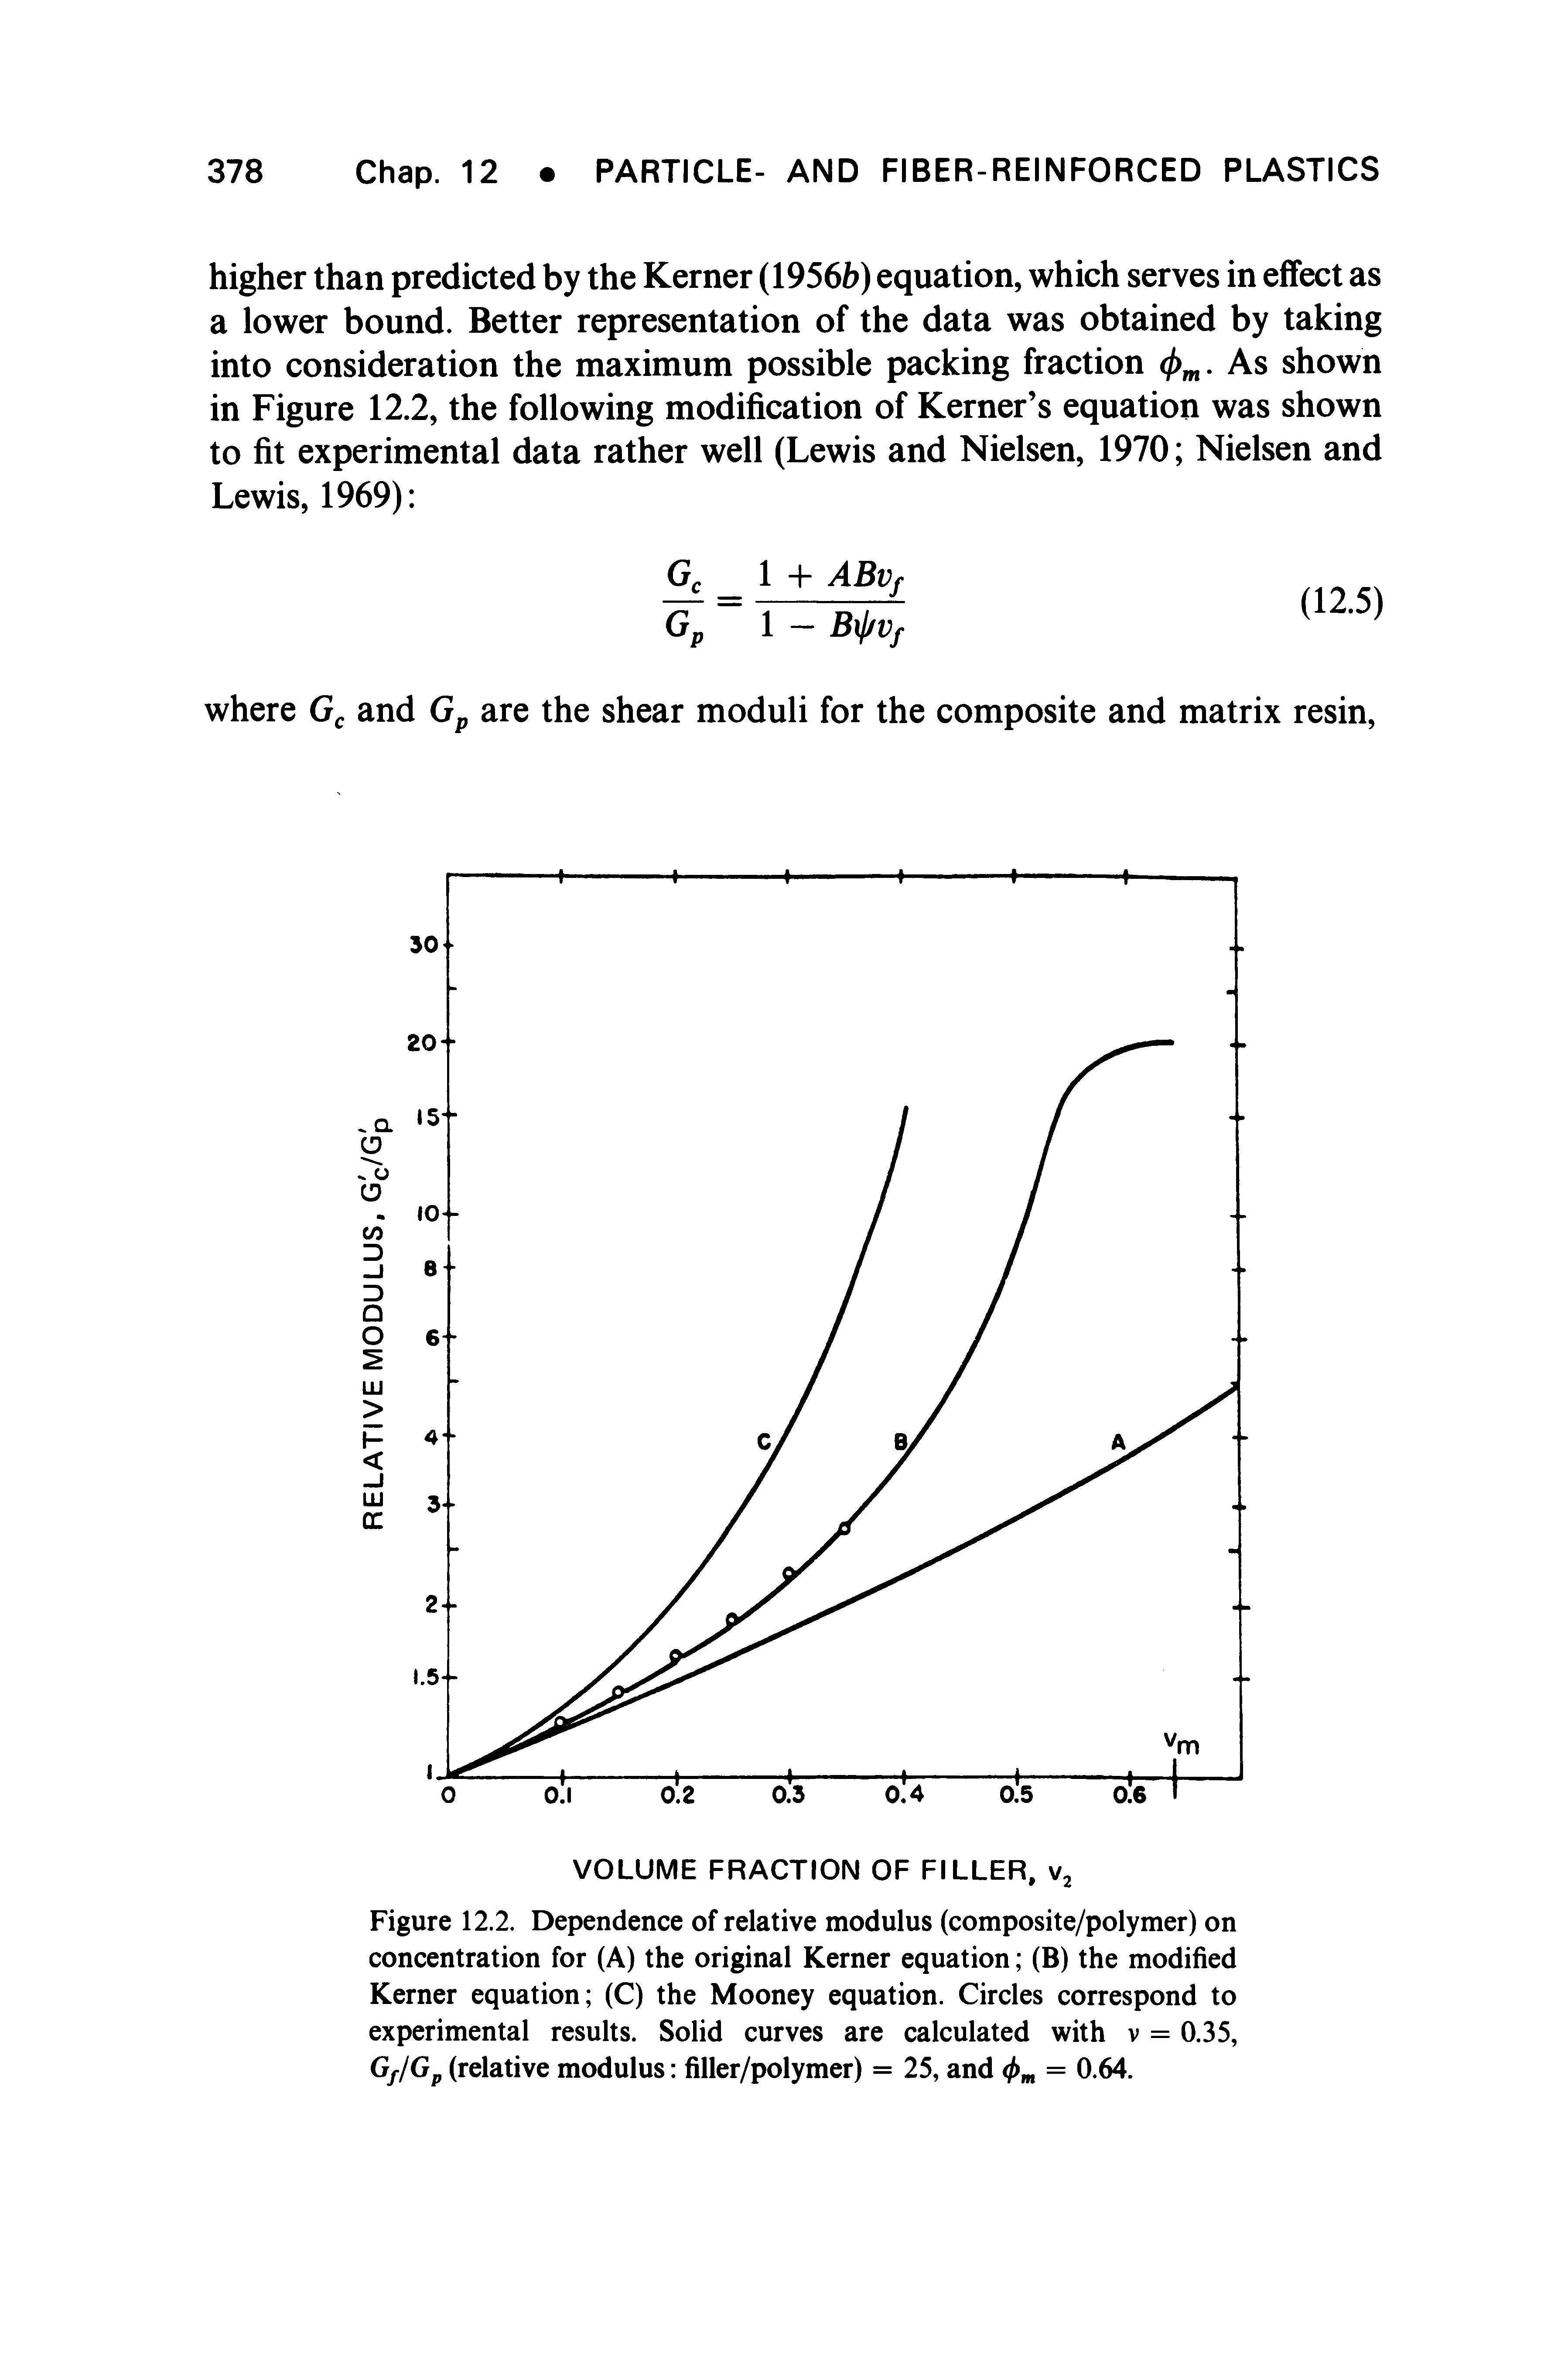 Figure 12.2. Dependence of relative modulus (composite/polymer) on concentration for (A) the original Kerner equation (B) the modified Kerner equation (C) the Mooney equation. Circles correspond to experimental results. Solid curves are calculated with v = 0.35, Gf/Gp (relative modulus filler/polymer) = 25, and <l> = 0.64.